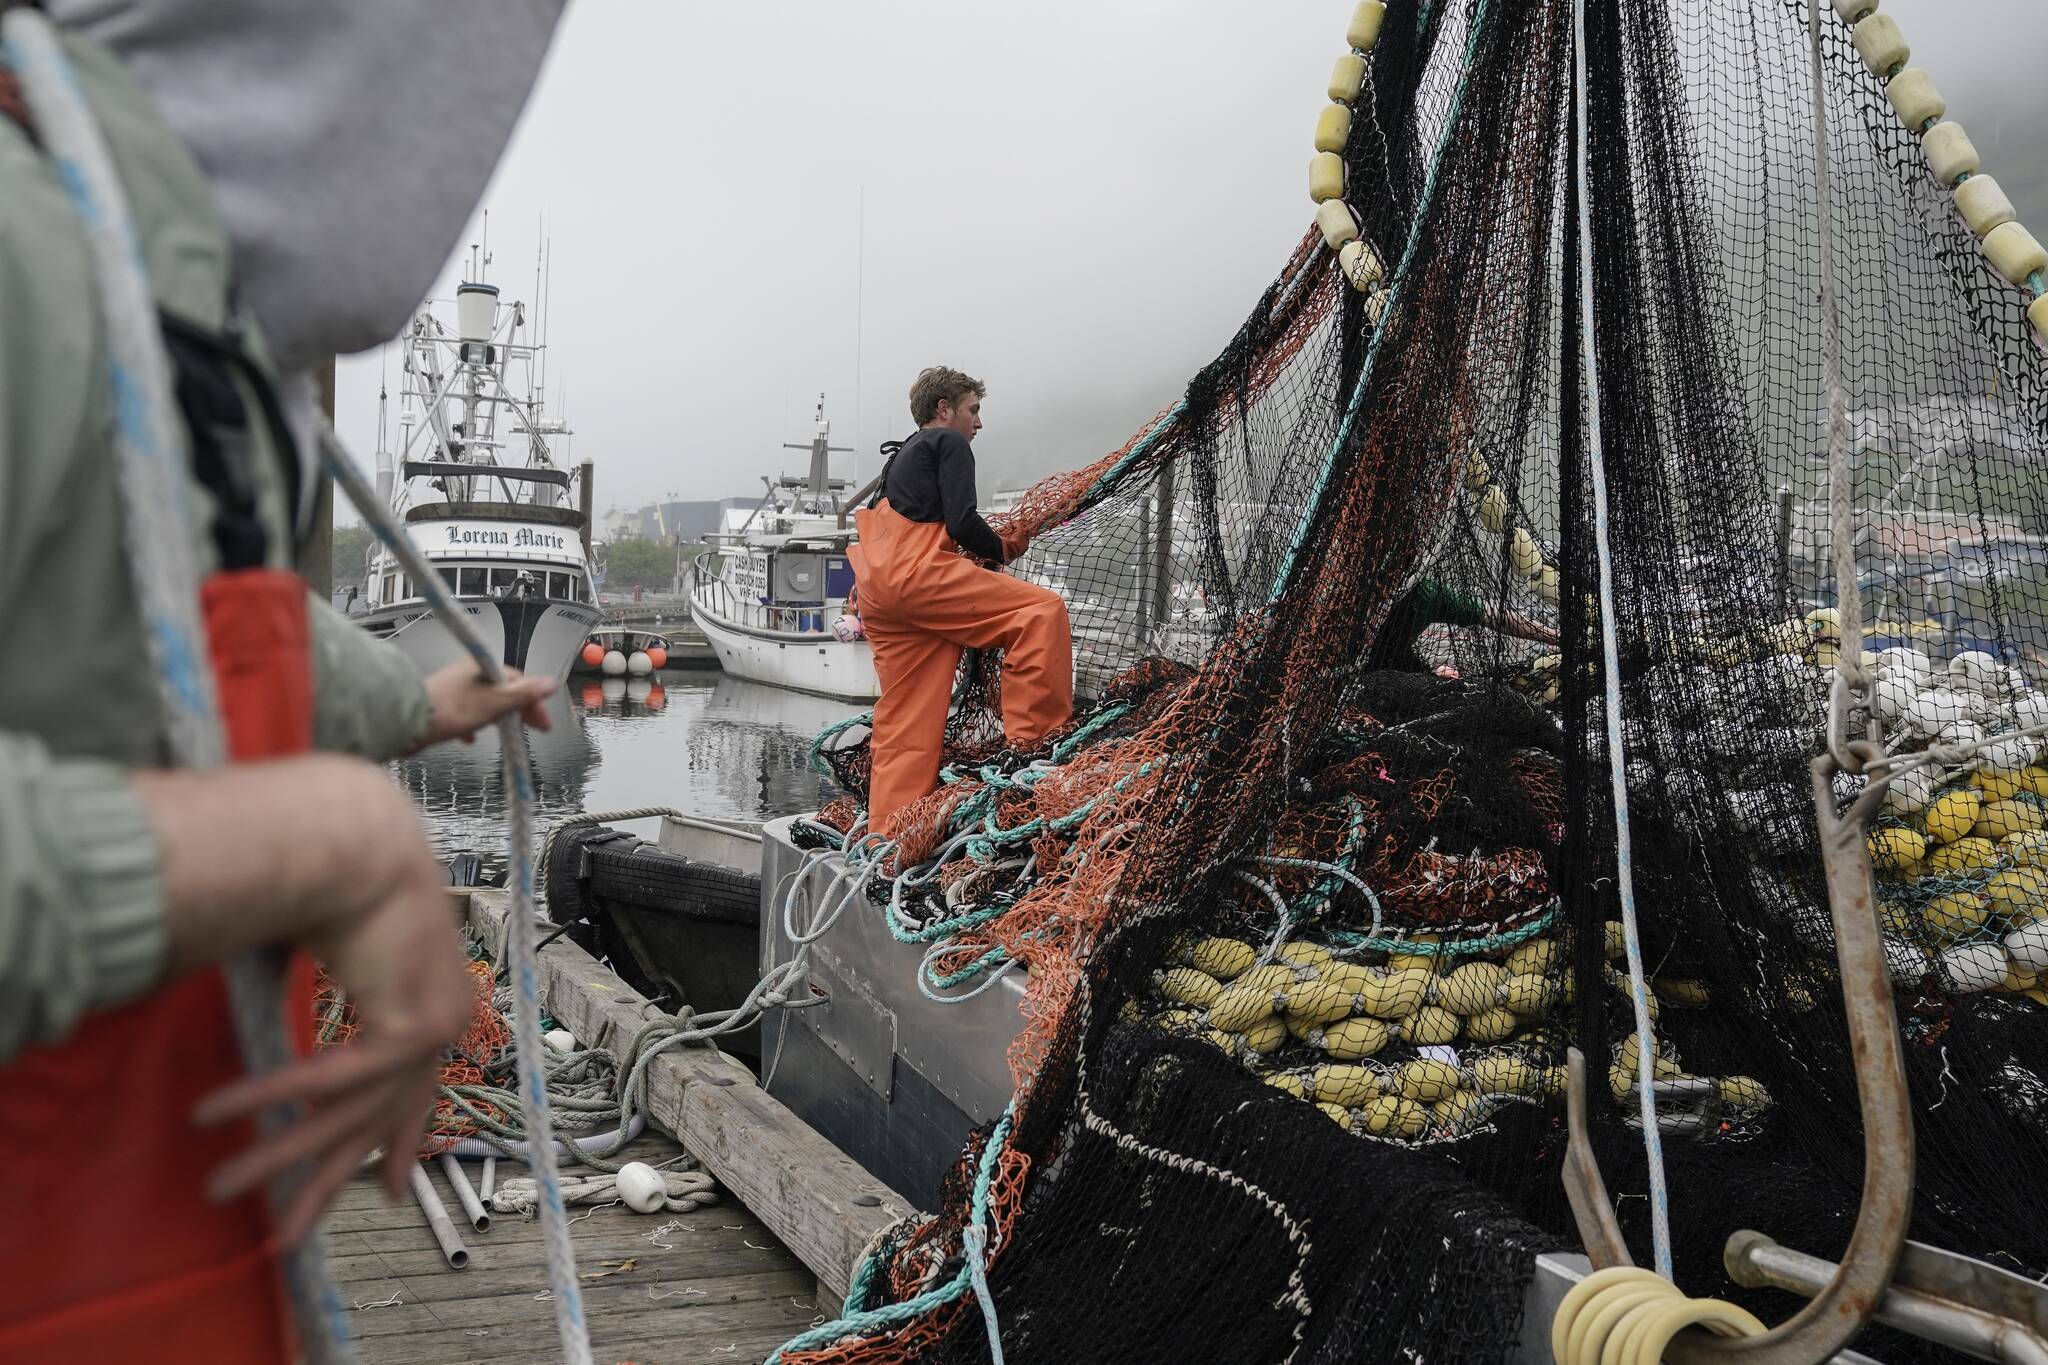 Deckhands stack nets on a boat before heading out to sea to fish salmon on Thursday, June 22, in Kodiak. (AP Photo/Joshua A. Bickel)